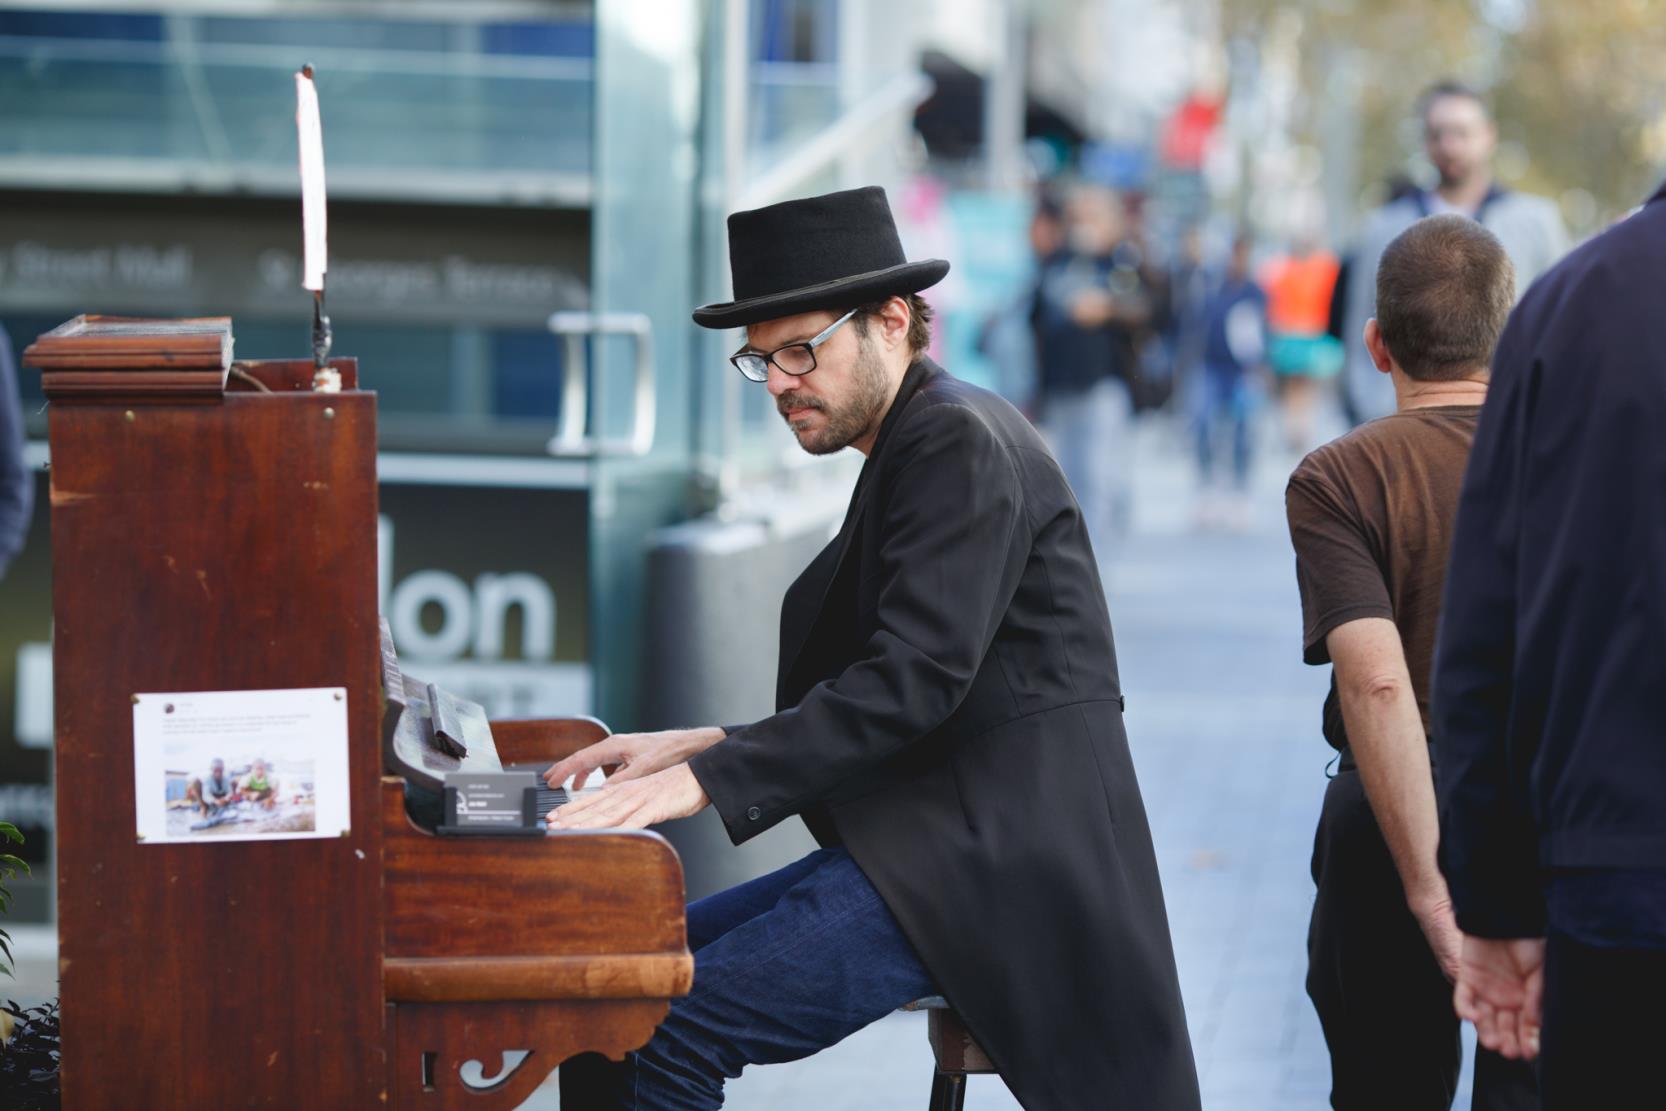 A pianist busks in the city streets